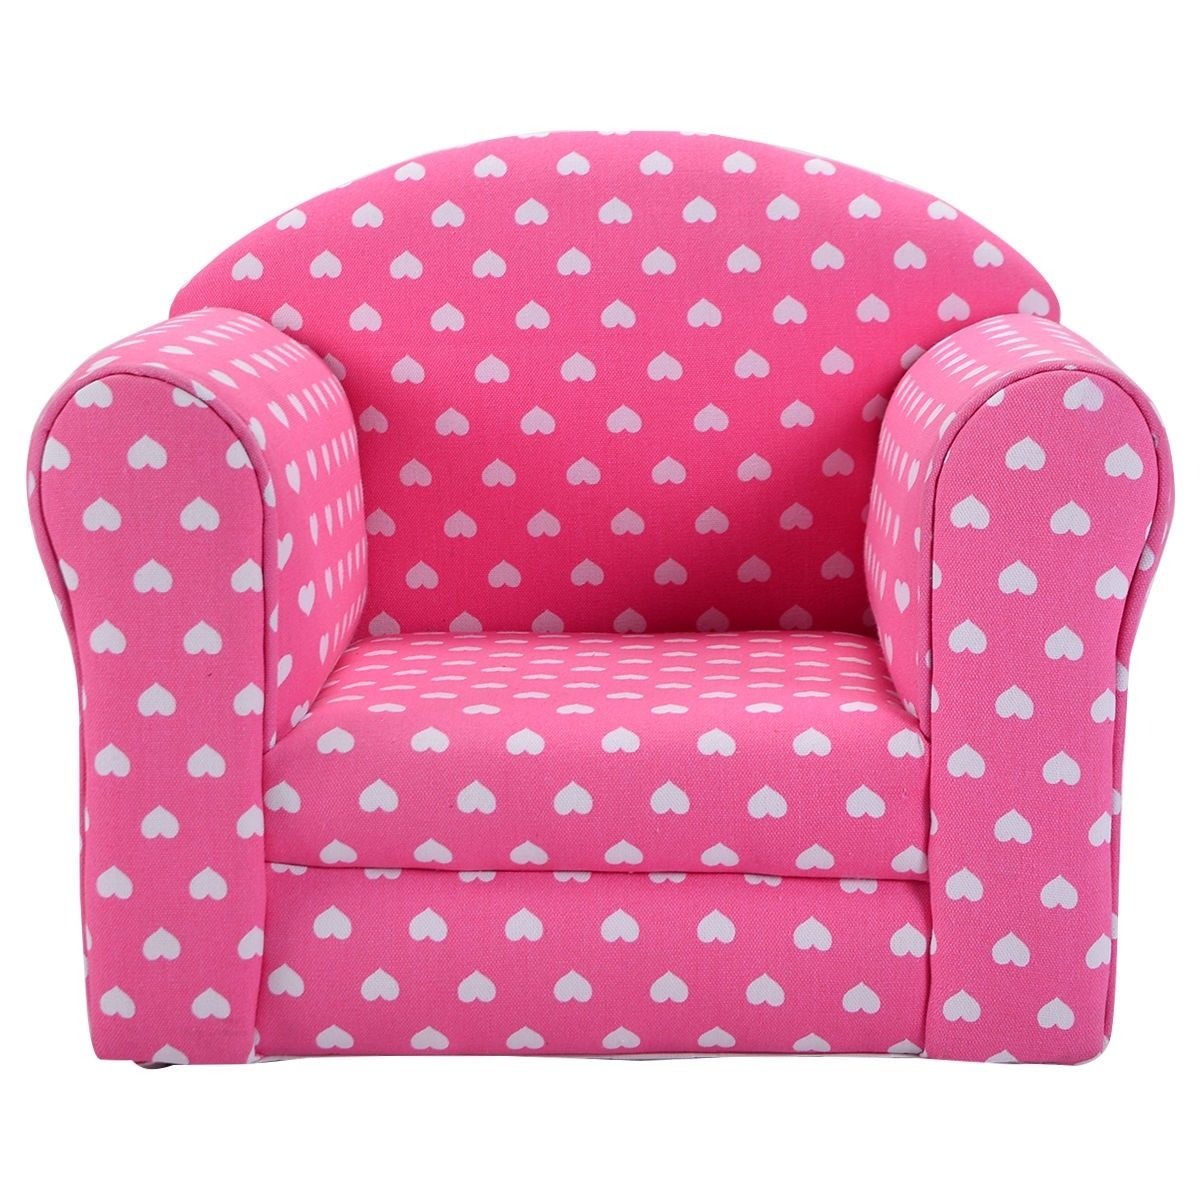 Heart Shaped Printed Armrest Children Couch 2 Colors Sofas Intended For Toddler Sofa Chairs (View 7 of 15)